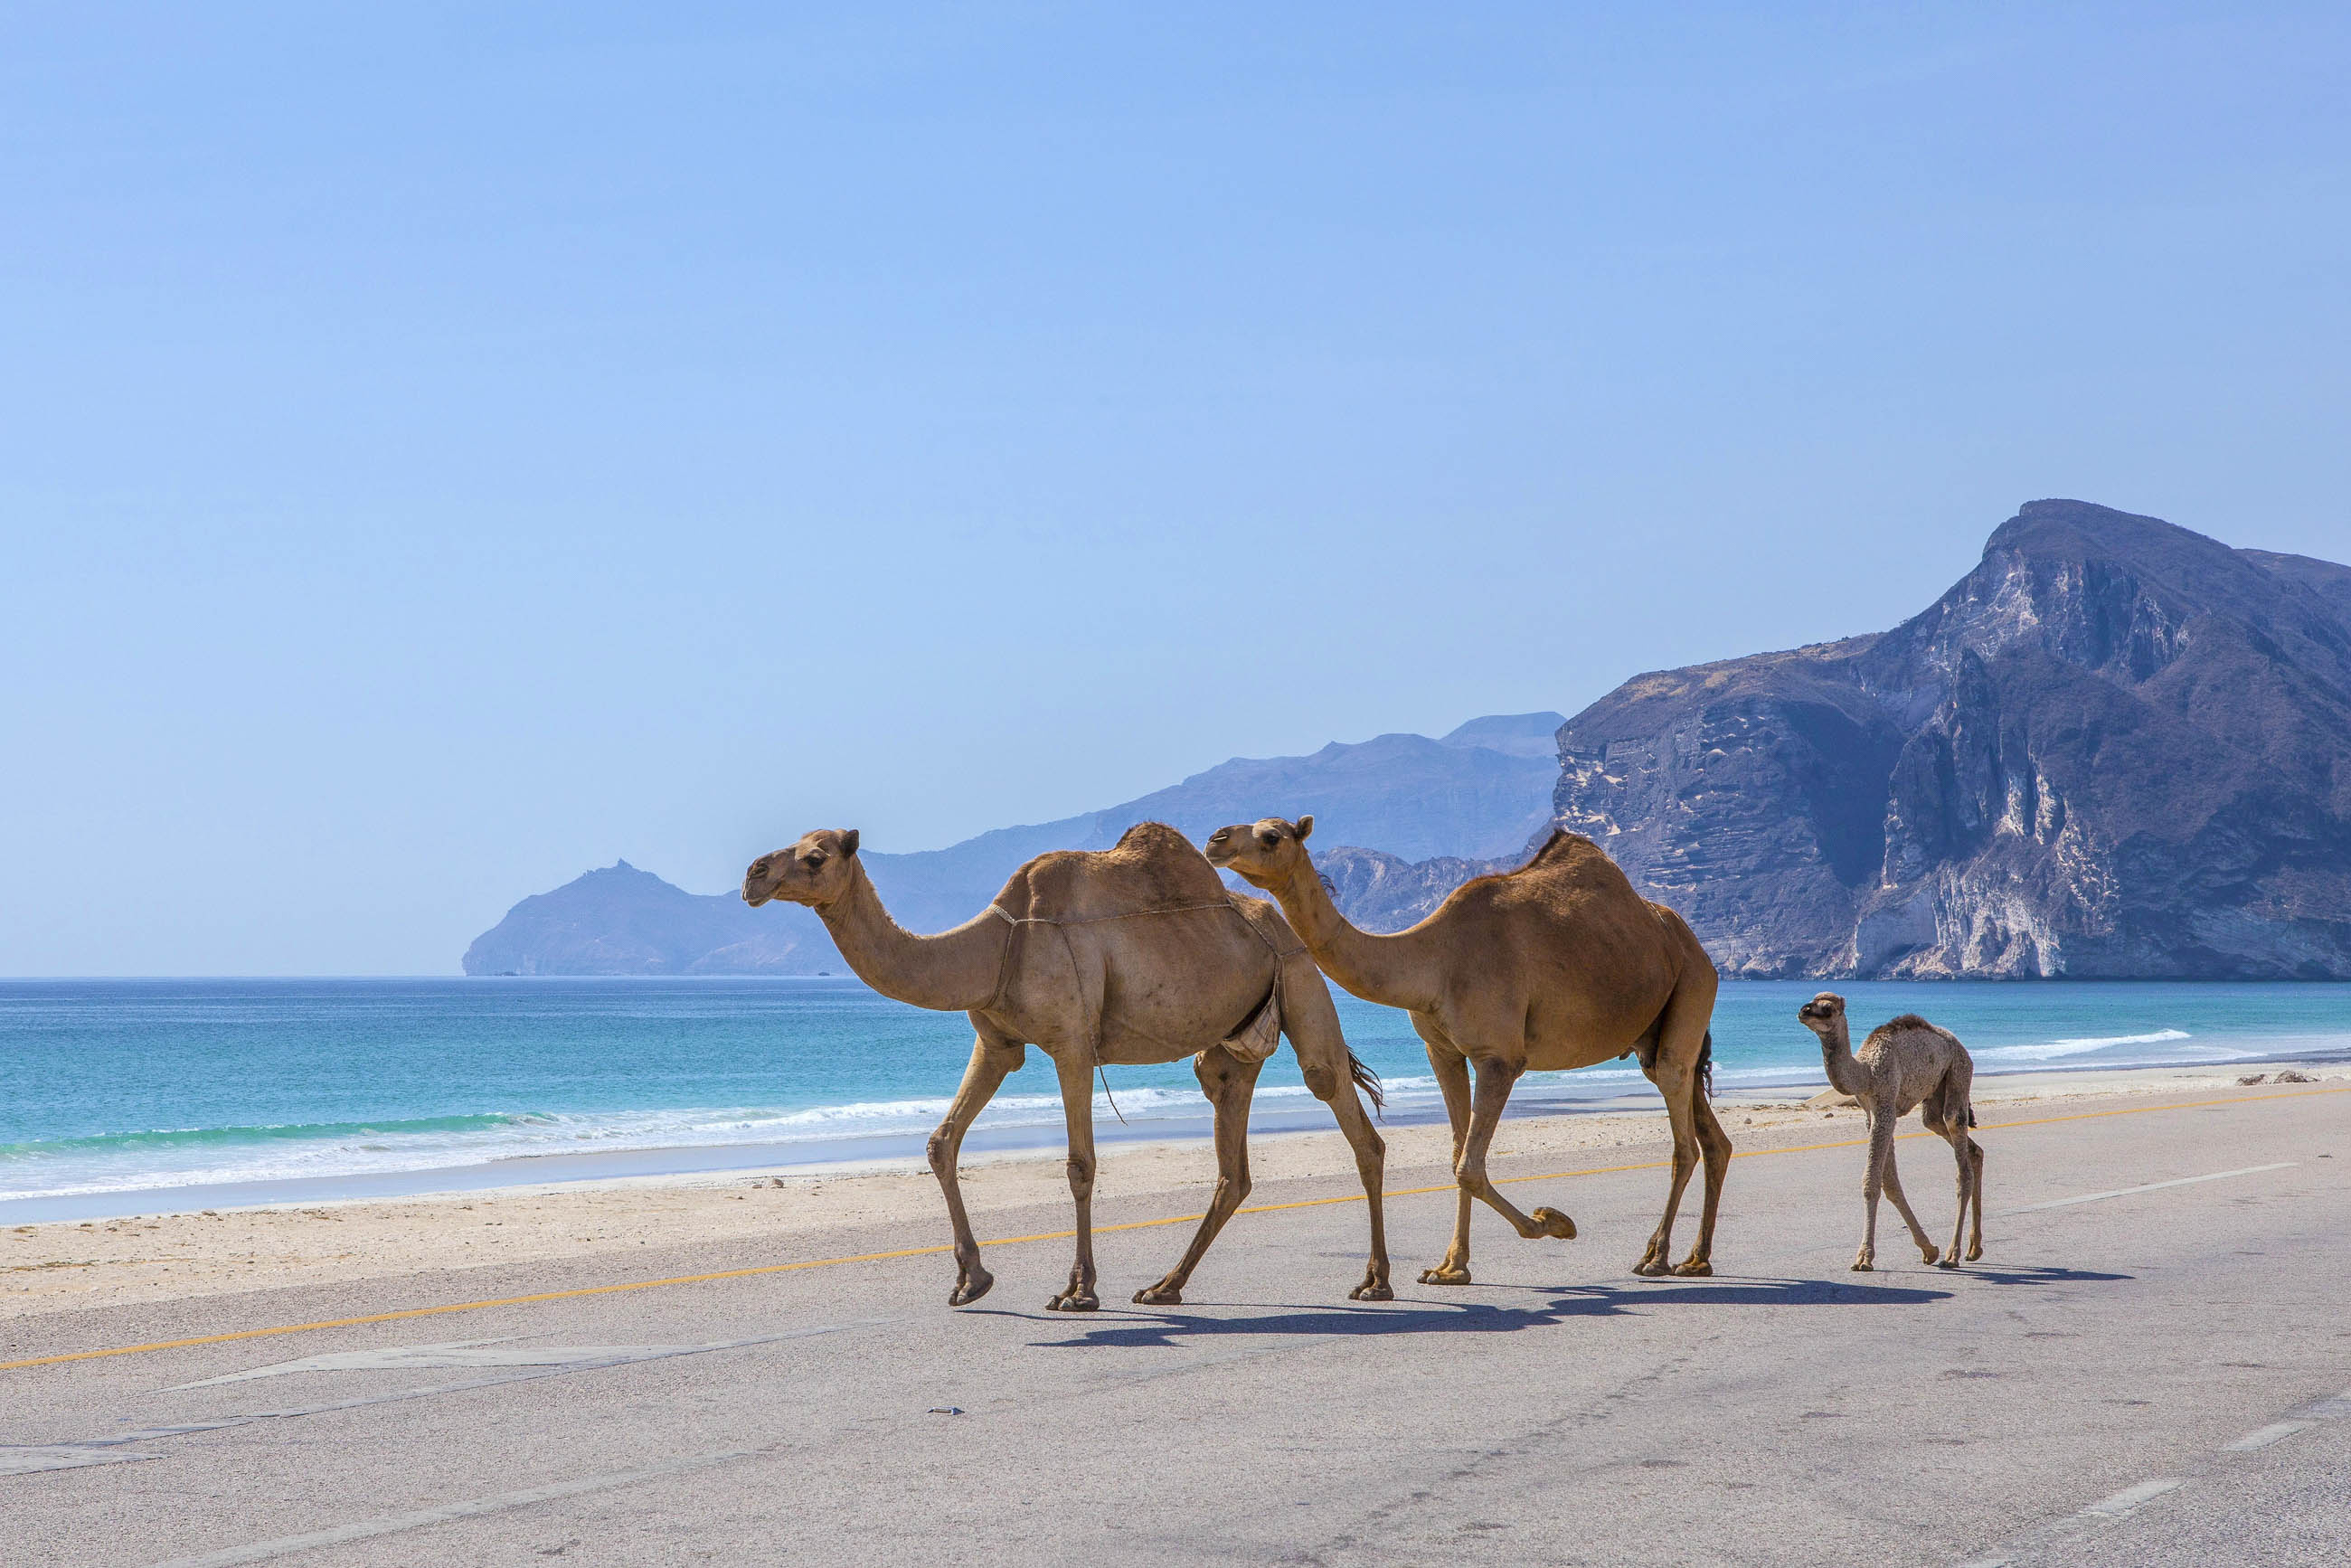 Oman: The oldest continuously independent state in the Arab world. 2600x1740 HD Wallpaper.